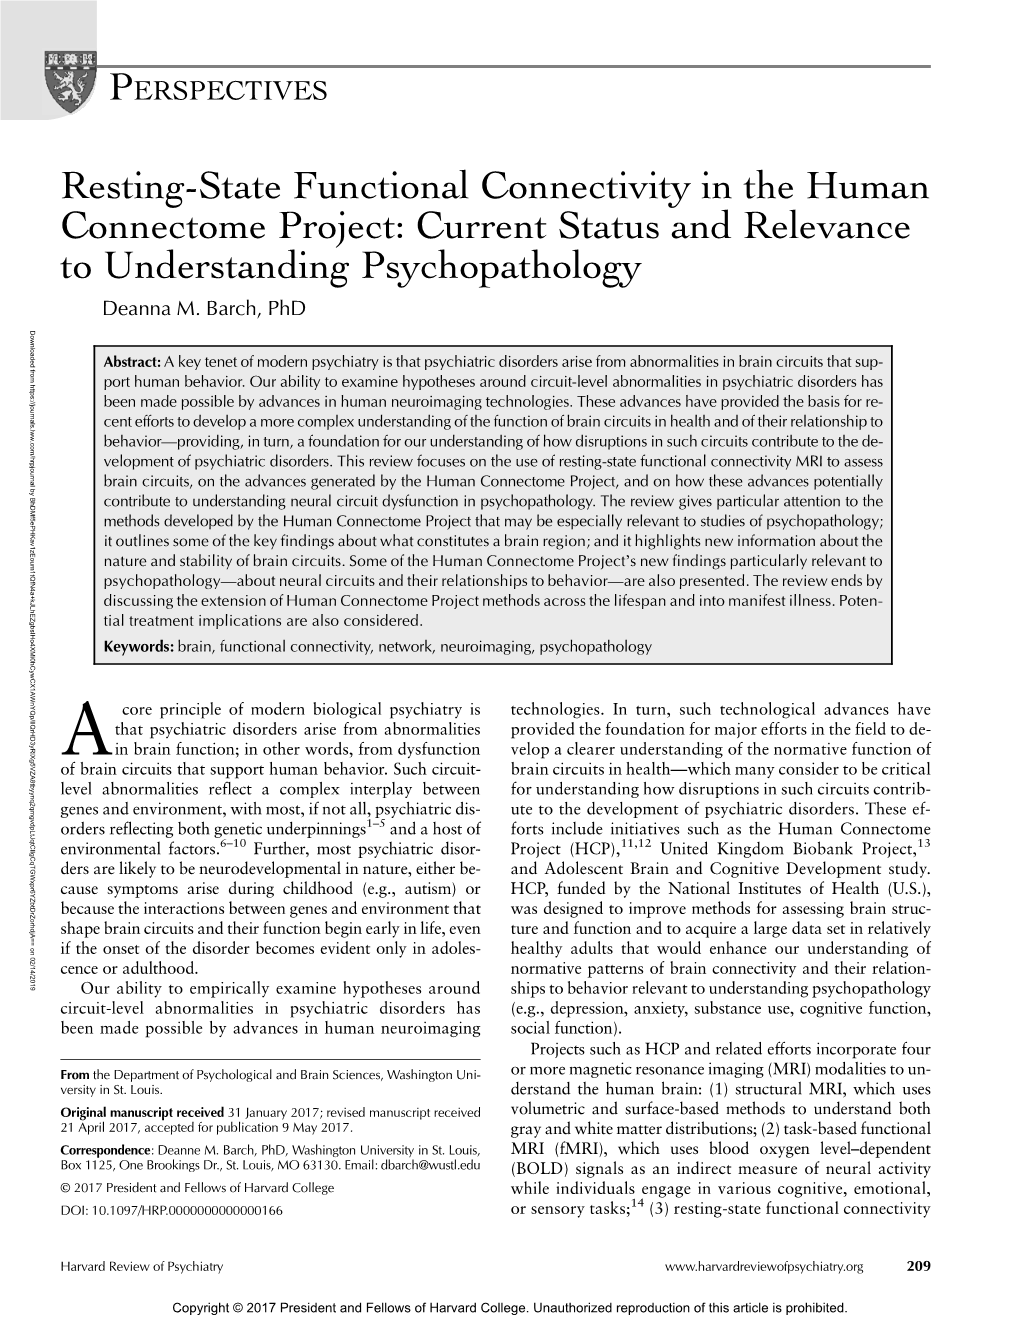 Resting-State Functional Connectivity in the Human Connectome Project